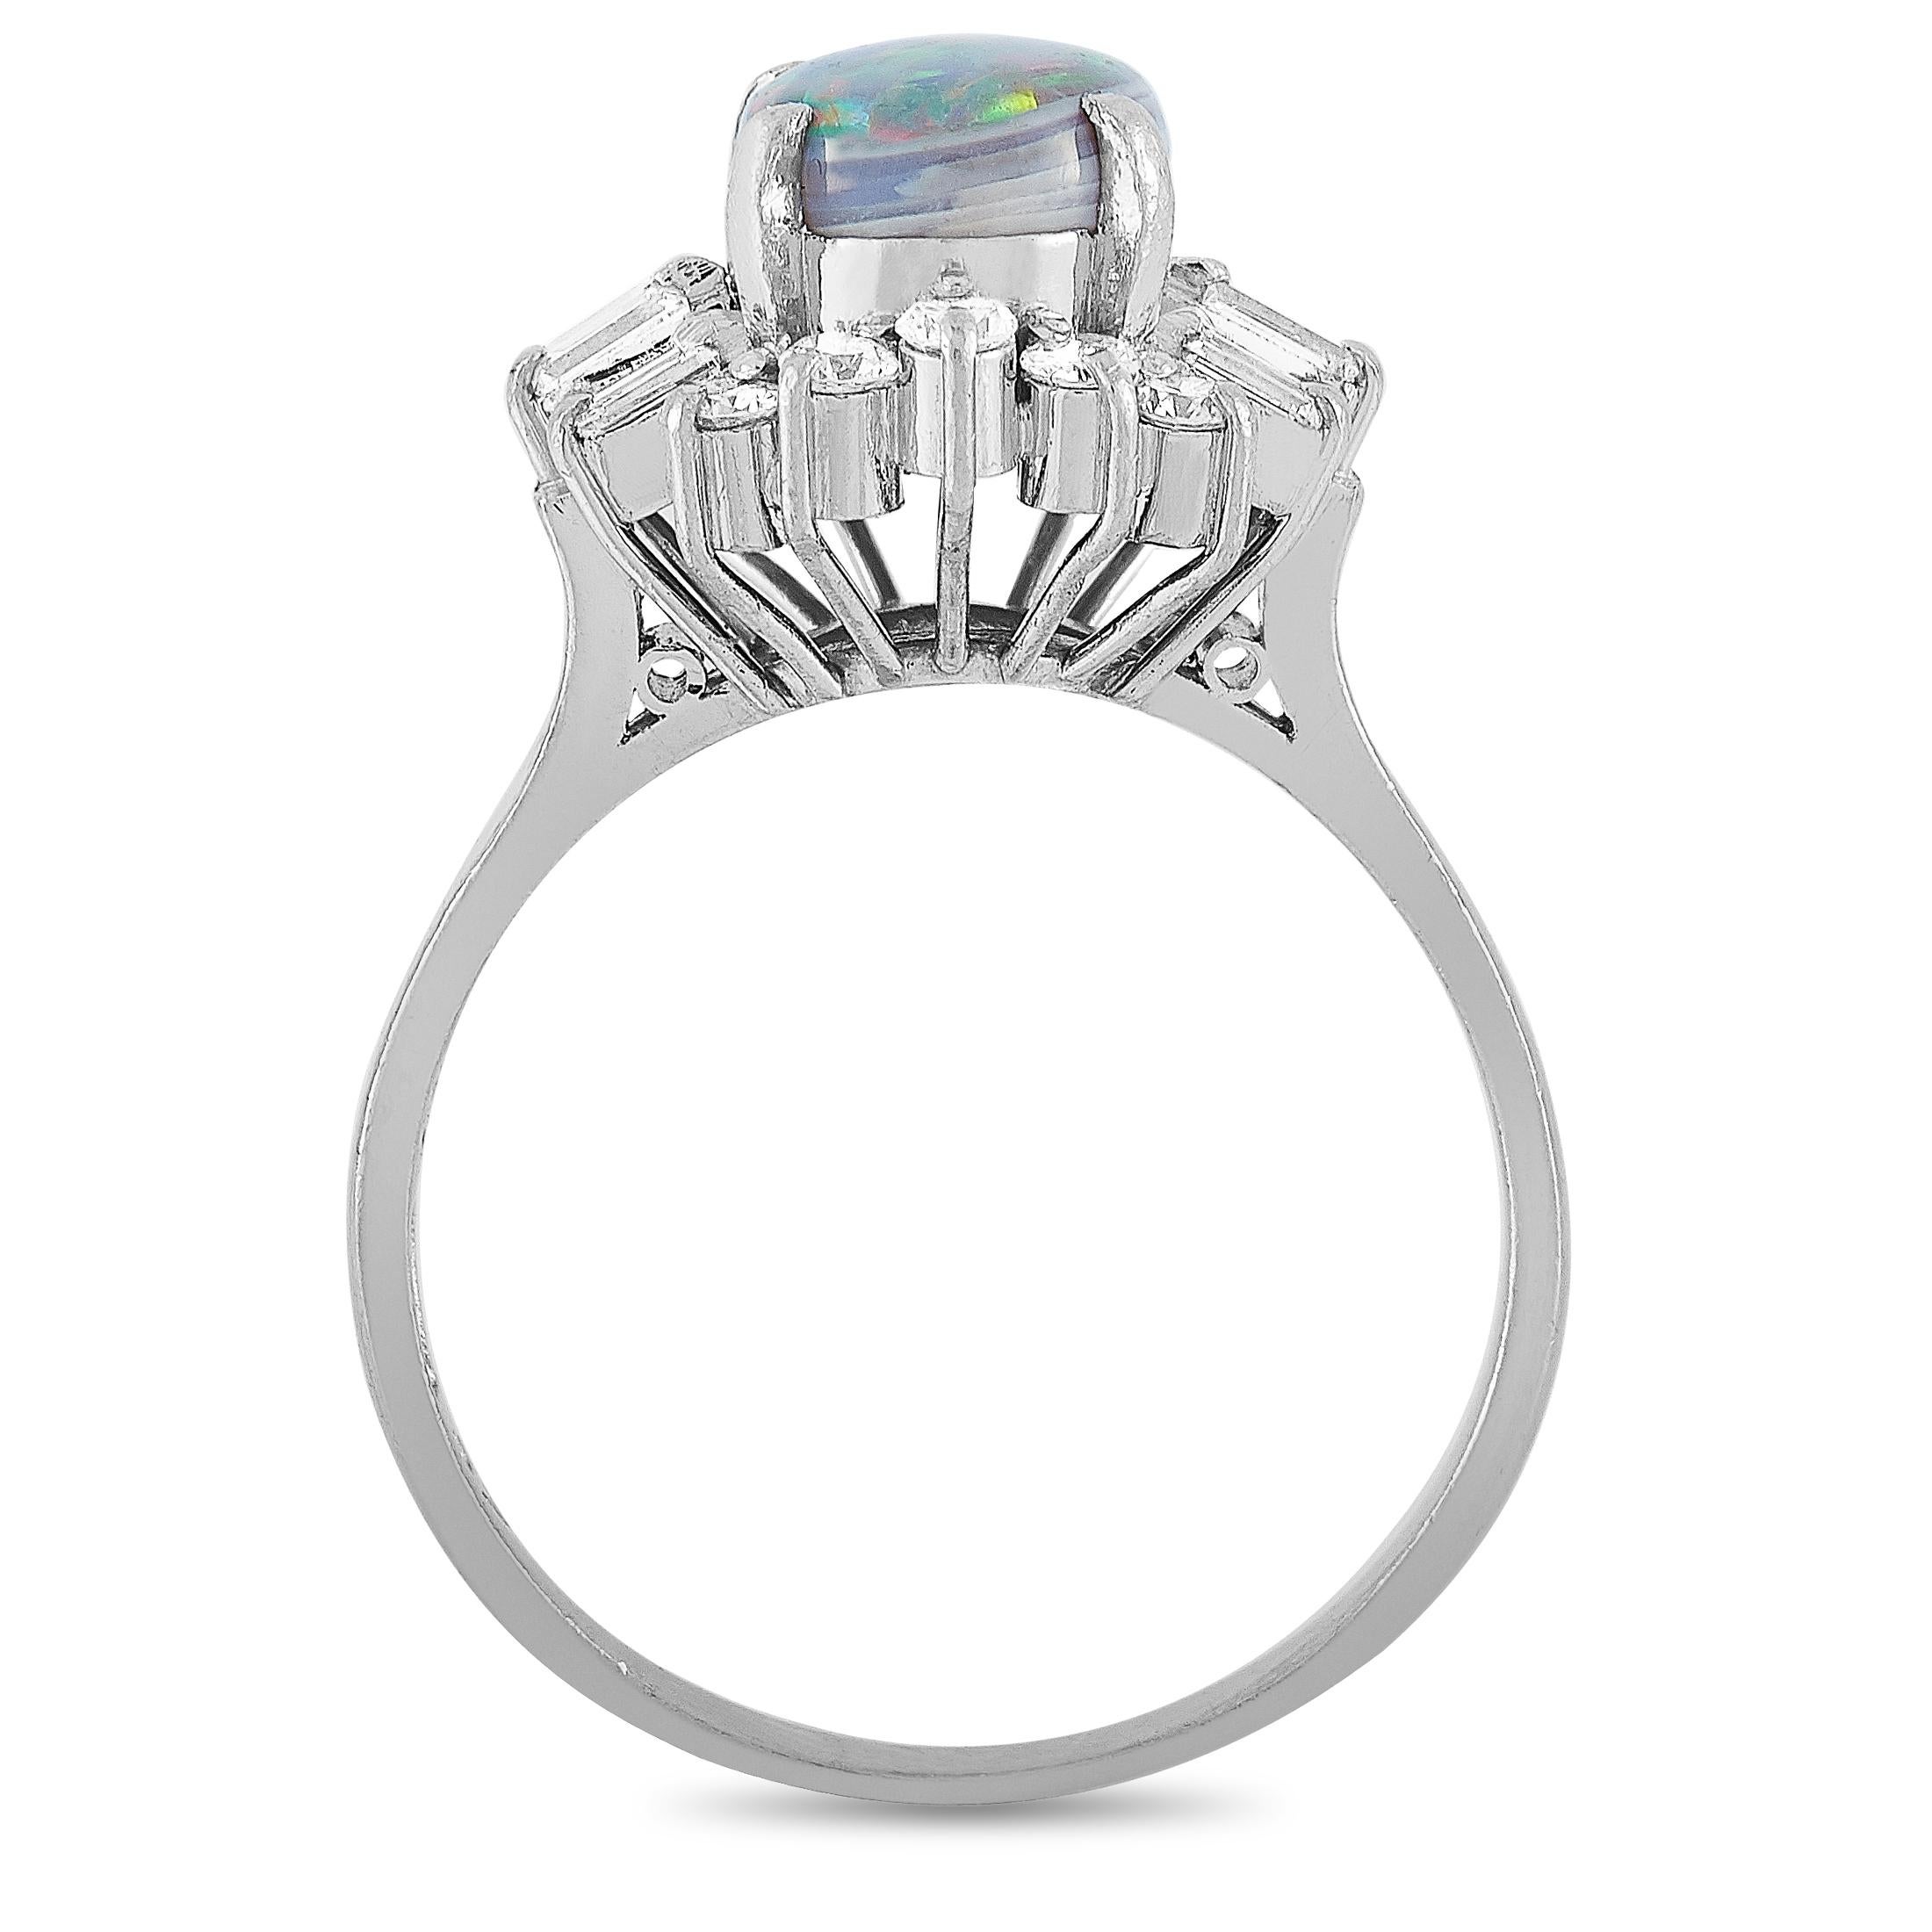 This LB Exclusive ring is crafted from platinum and weighs 5.9 grams. It boasts band thickness of 2 mm and top height of 10 mm, while top dimensions measure 14 by 13 mm. The ring is set with a 1.37 ct opal and a total of 0.57 carats of